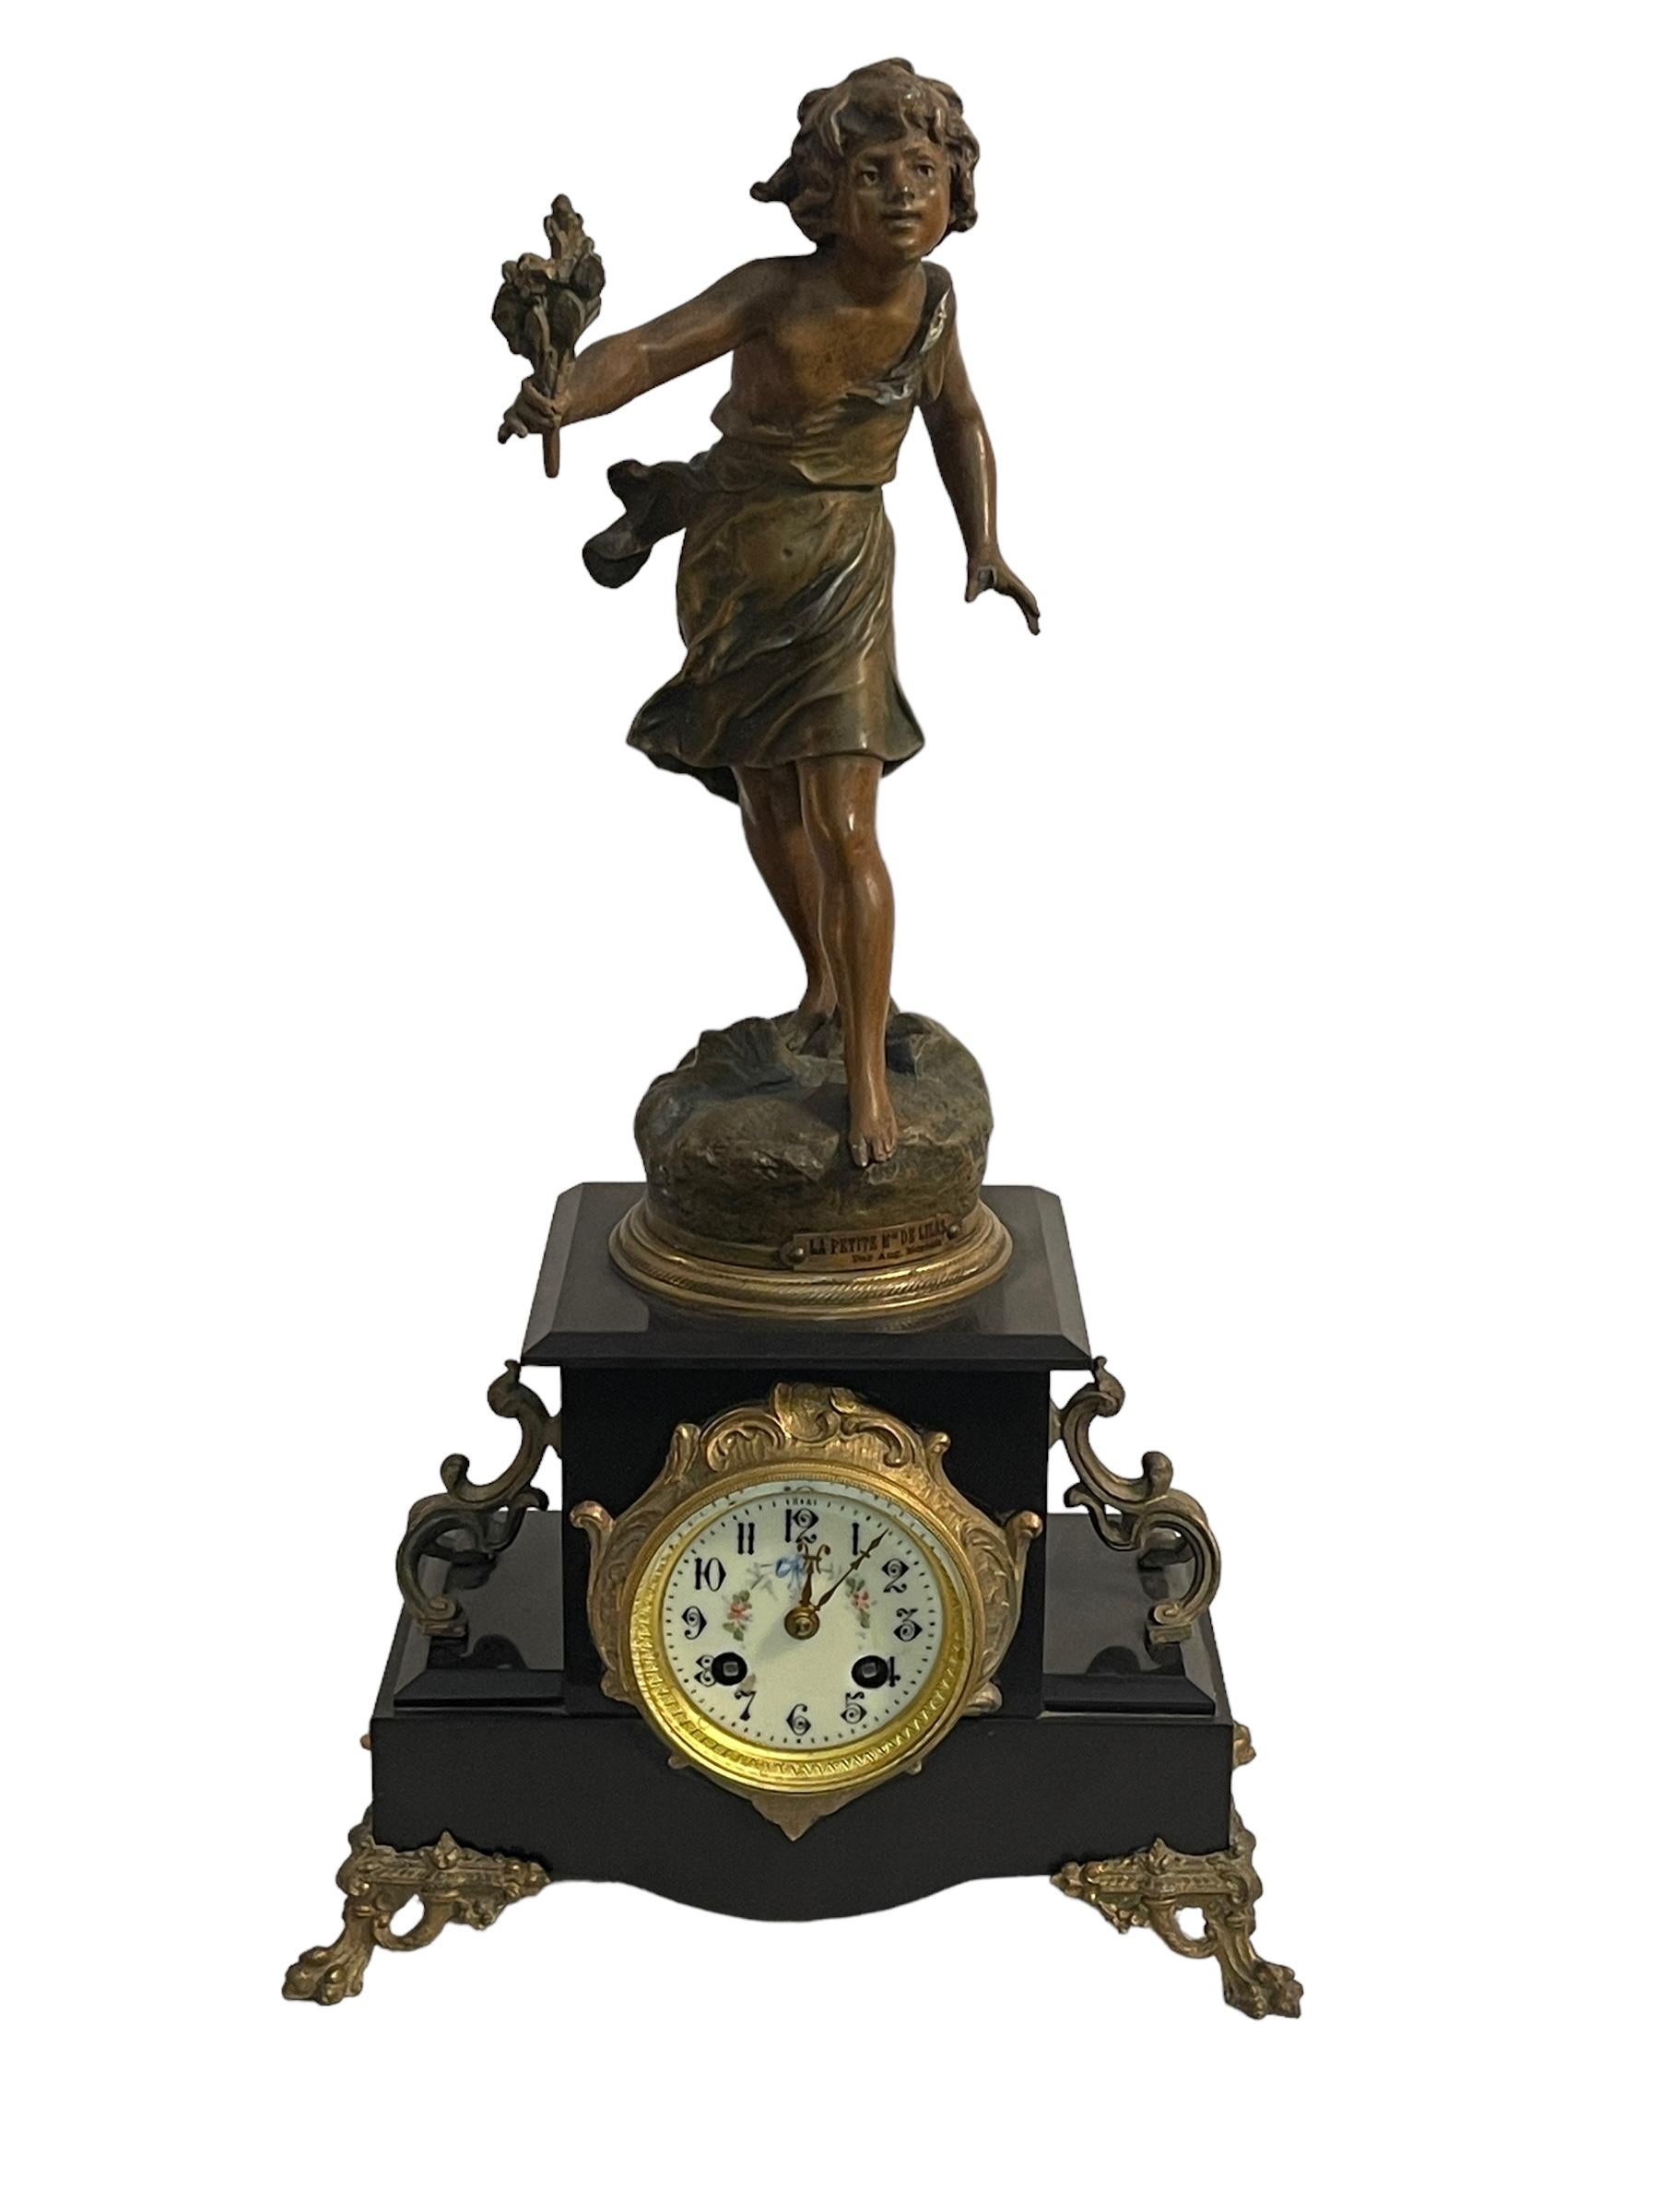 Table clock, late 19th century with mounted bronze sculpture, by Auguste Moreau
Refined clock in black marble and bronze friezes, with bronze sculpture, by Auguste Moreau, girl with a bouquet of flowers
Excellent condition, as shown in the photo,